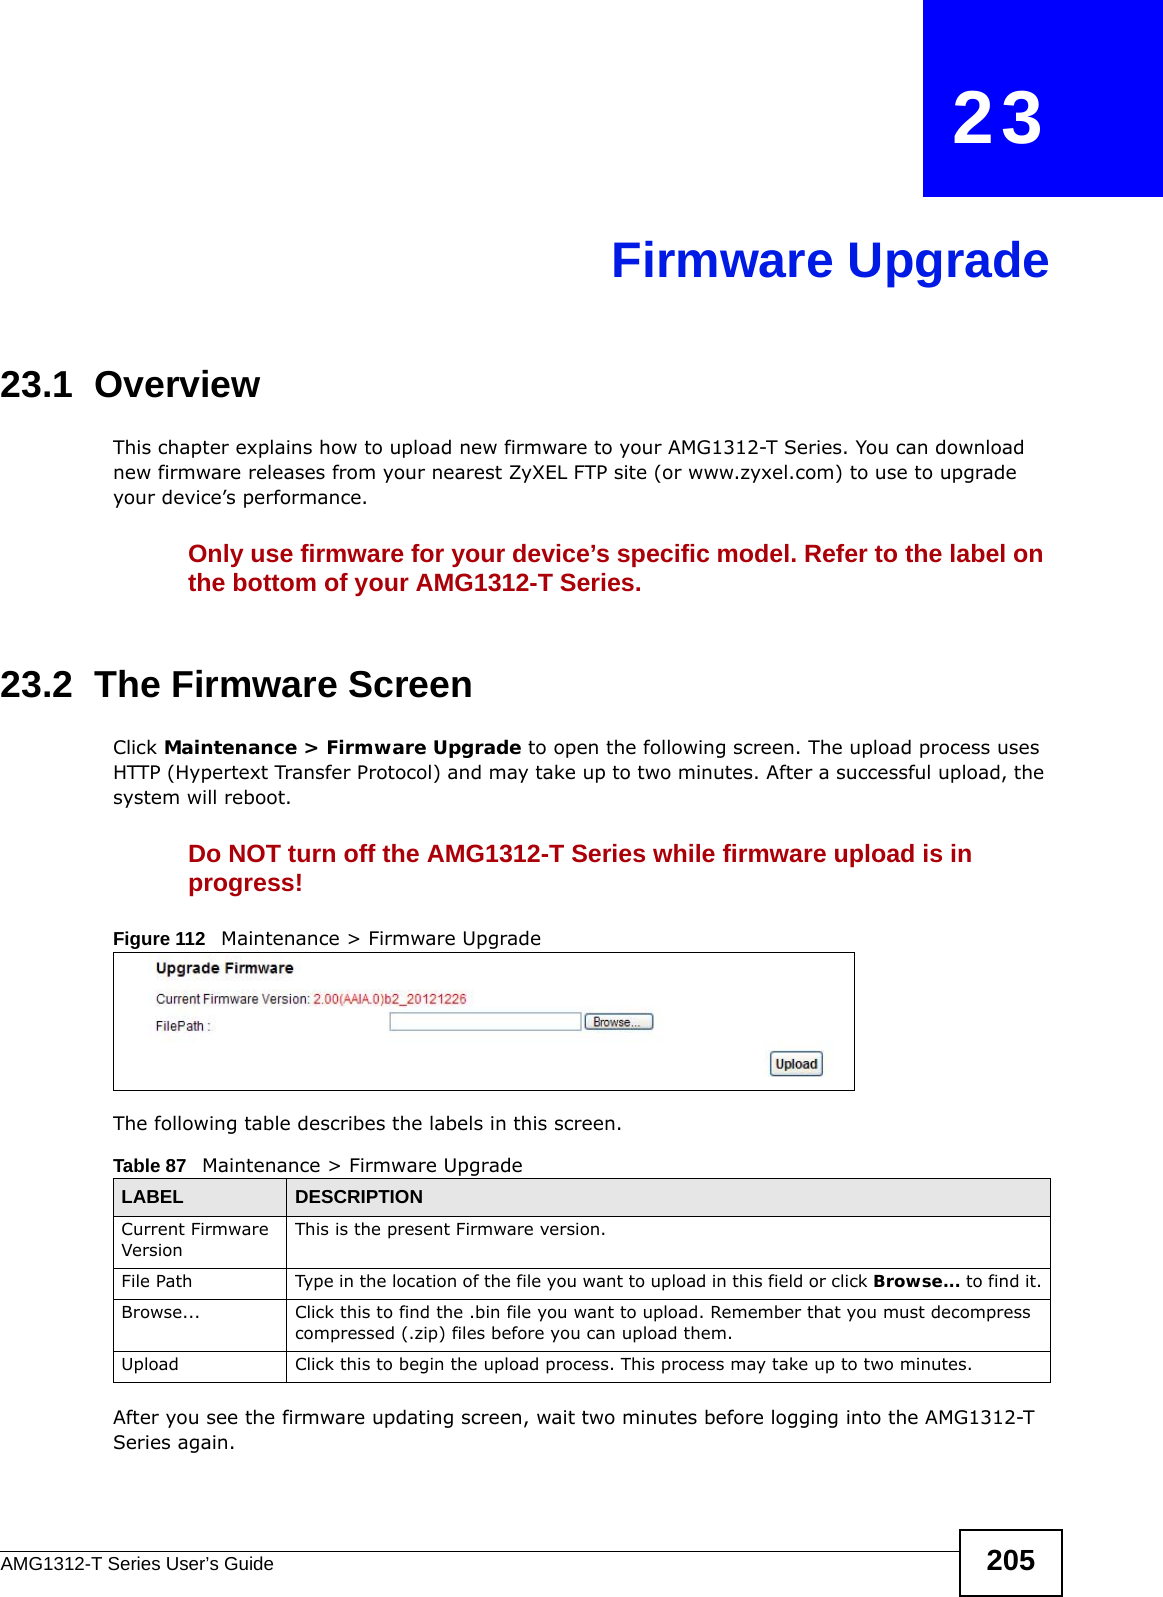 AMG1312-T Series User’s Guide 205CHAPTER   23Firmware Upgrade23.1  OverviewThis chapter explains how to upload new firmware to your AMG1312-T Series. You can download new firmware releases from your nearest ZyXEL FTP site (or www.zyxel.com) to use to upgrade your device’s performance.Only use firmware for your device’s specific model. Refer to the label on the bottom of your AMG1312-T Series.23.2  The Firmware ScreenClick Maintenance &gt; Firmware Upgrade to open the following screen. The upload process uses HTTP (Hypertext Transfer Protocol) and may take up to two minutes. After a successful upload, the system will reboot. Do NOT turn off the AMG1312-T Series while firmware upload is in progress!Figure 112   Maintenance &gt; Firmware UpgradeThe following table describes the labels in this screen. After you see the firmware updating screen, wait two minutes before logging into the AMG1312-T Series again. Table 87   Maintenance &gt; Firmware UpgradeLABEL DESCRIPTIONCurrent Firmware VersionThis is the present Firmware version. File Path Type in the location of the file you want to upload in this field or click Browse... to find it.Browse...  Click this to find the .bin file you want to upload. Remember that you must decompress compressed (.zip) files before you can upload them. Upload  Click this to begin the upload process. This process may take up to two minutes.